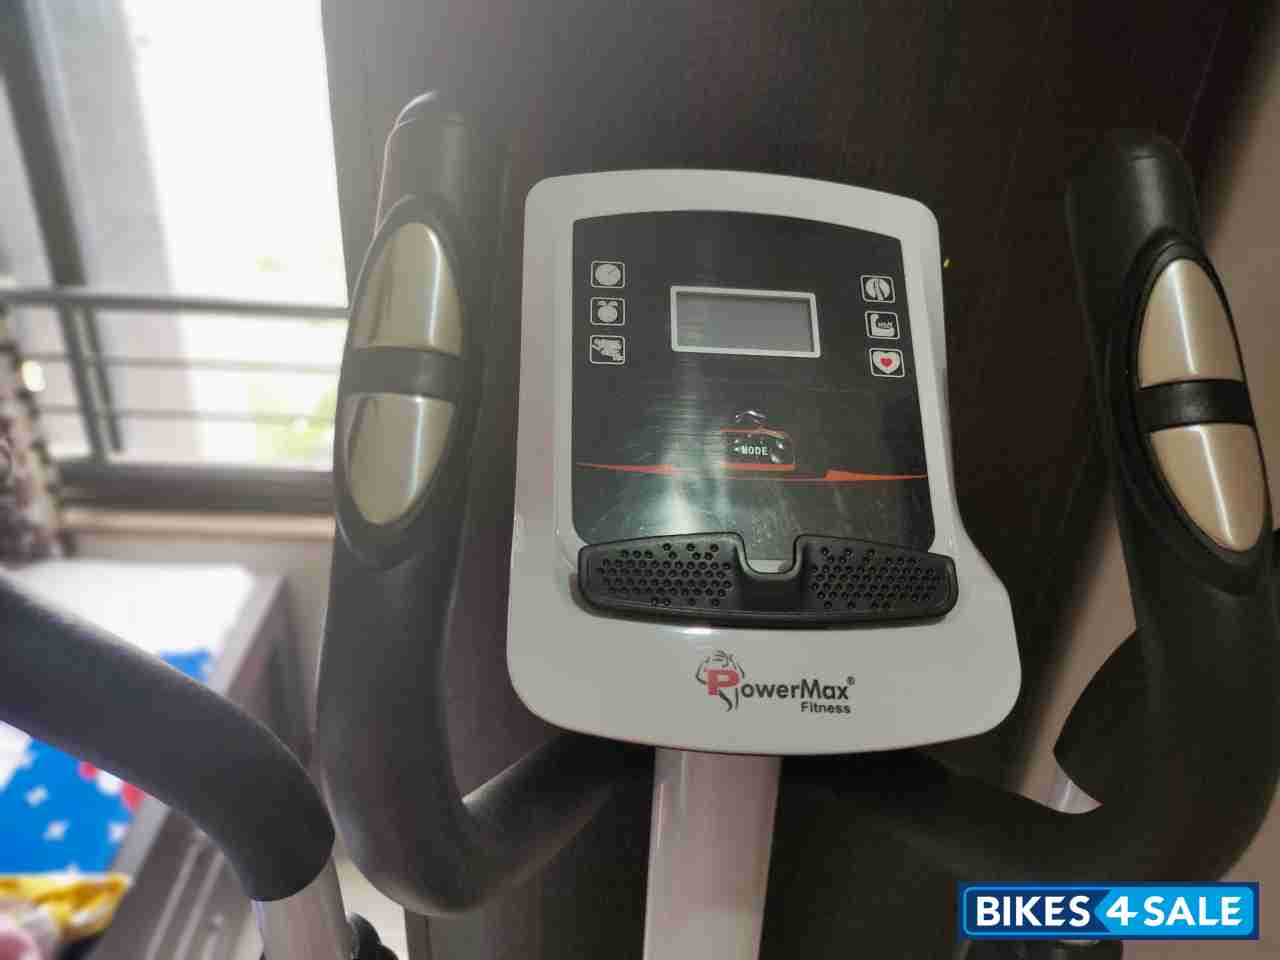 Bicycle  Power max fitness cycle